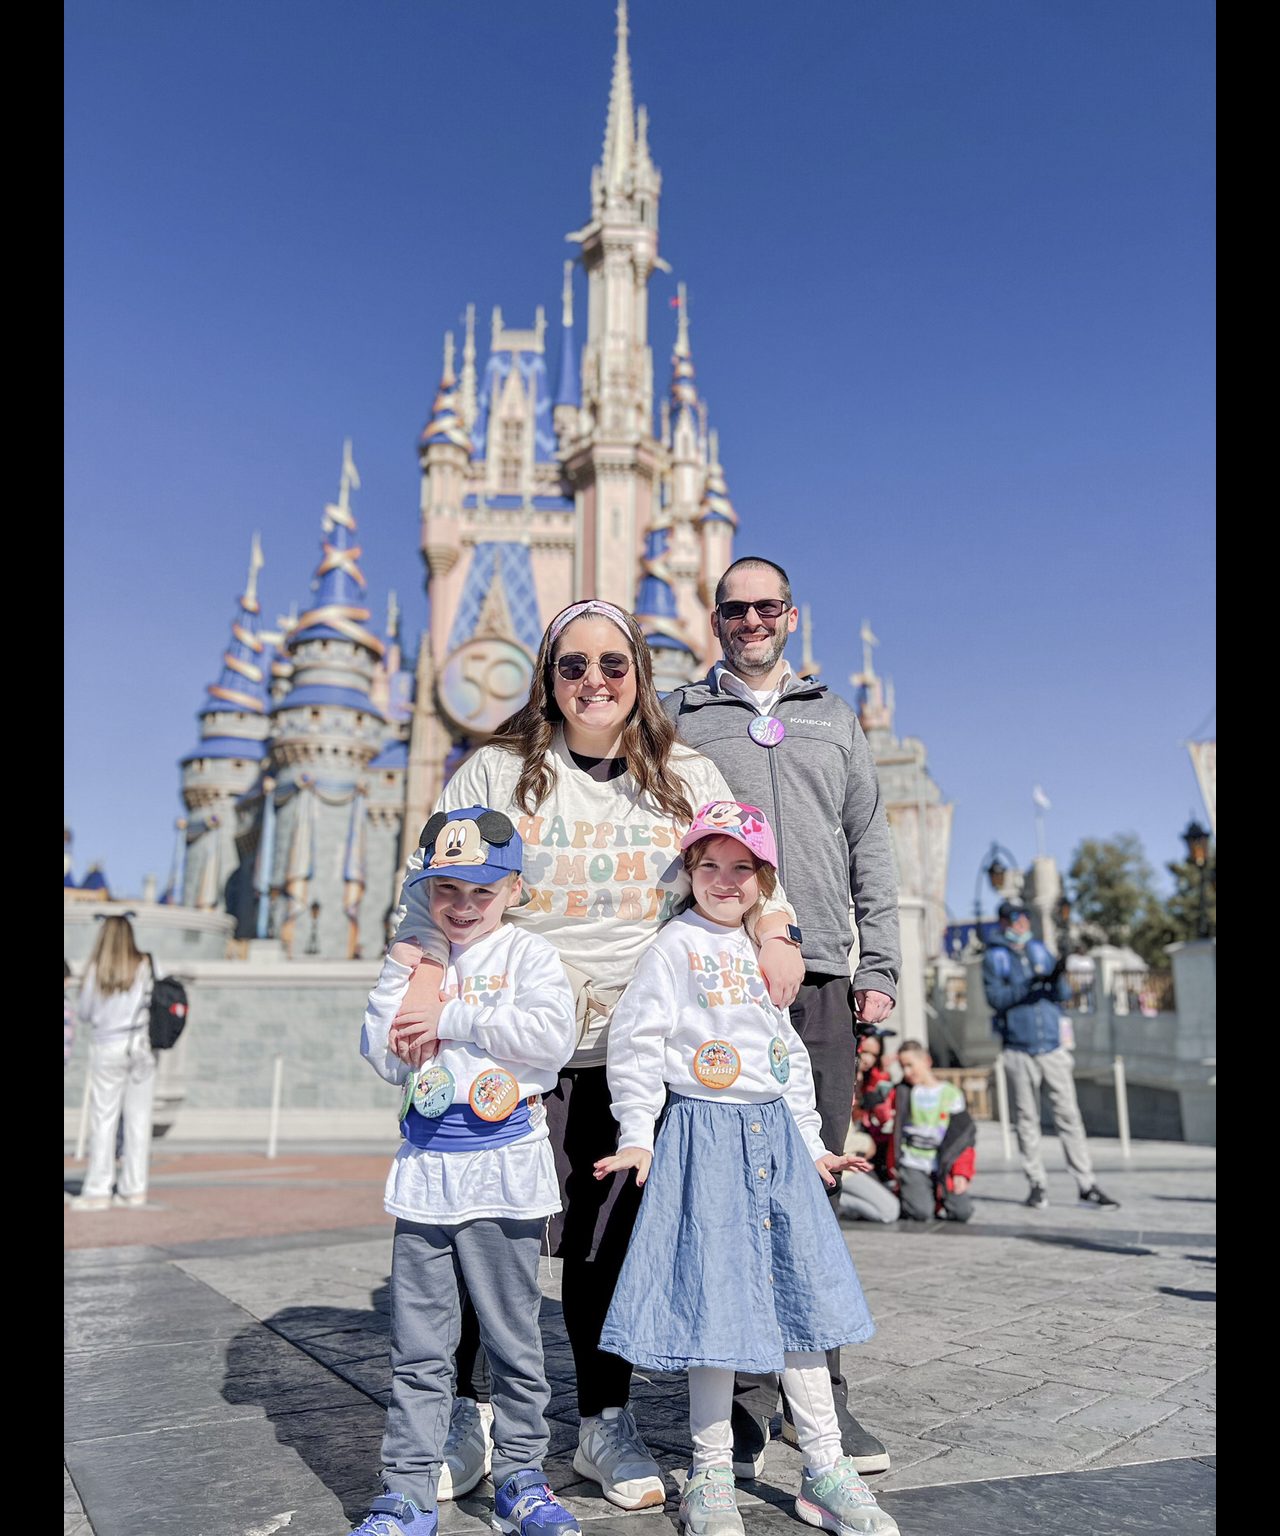 Disney’s Magic Kingdom Itinerary and Tips To Make the Most of Your Time